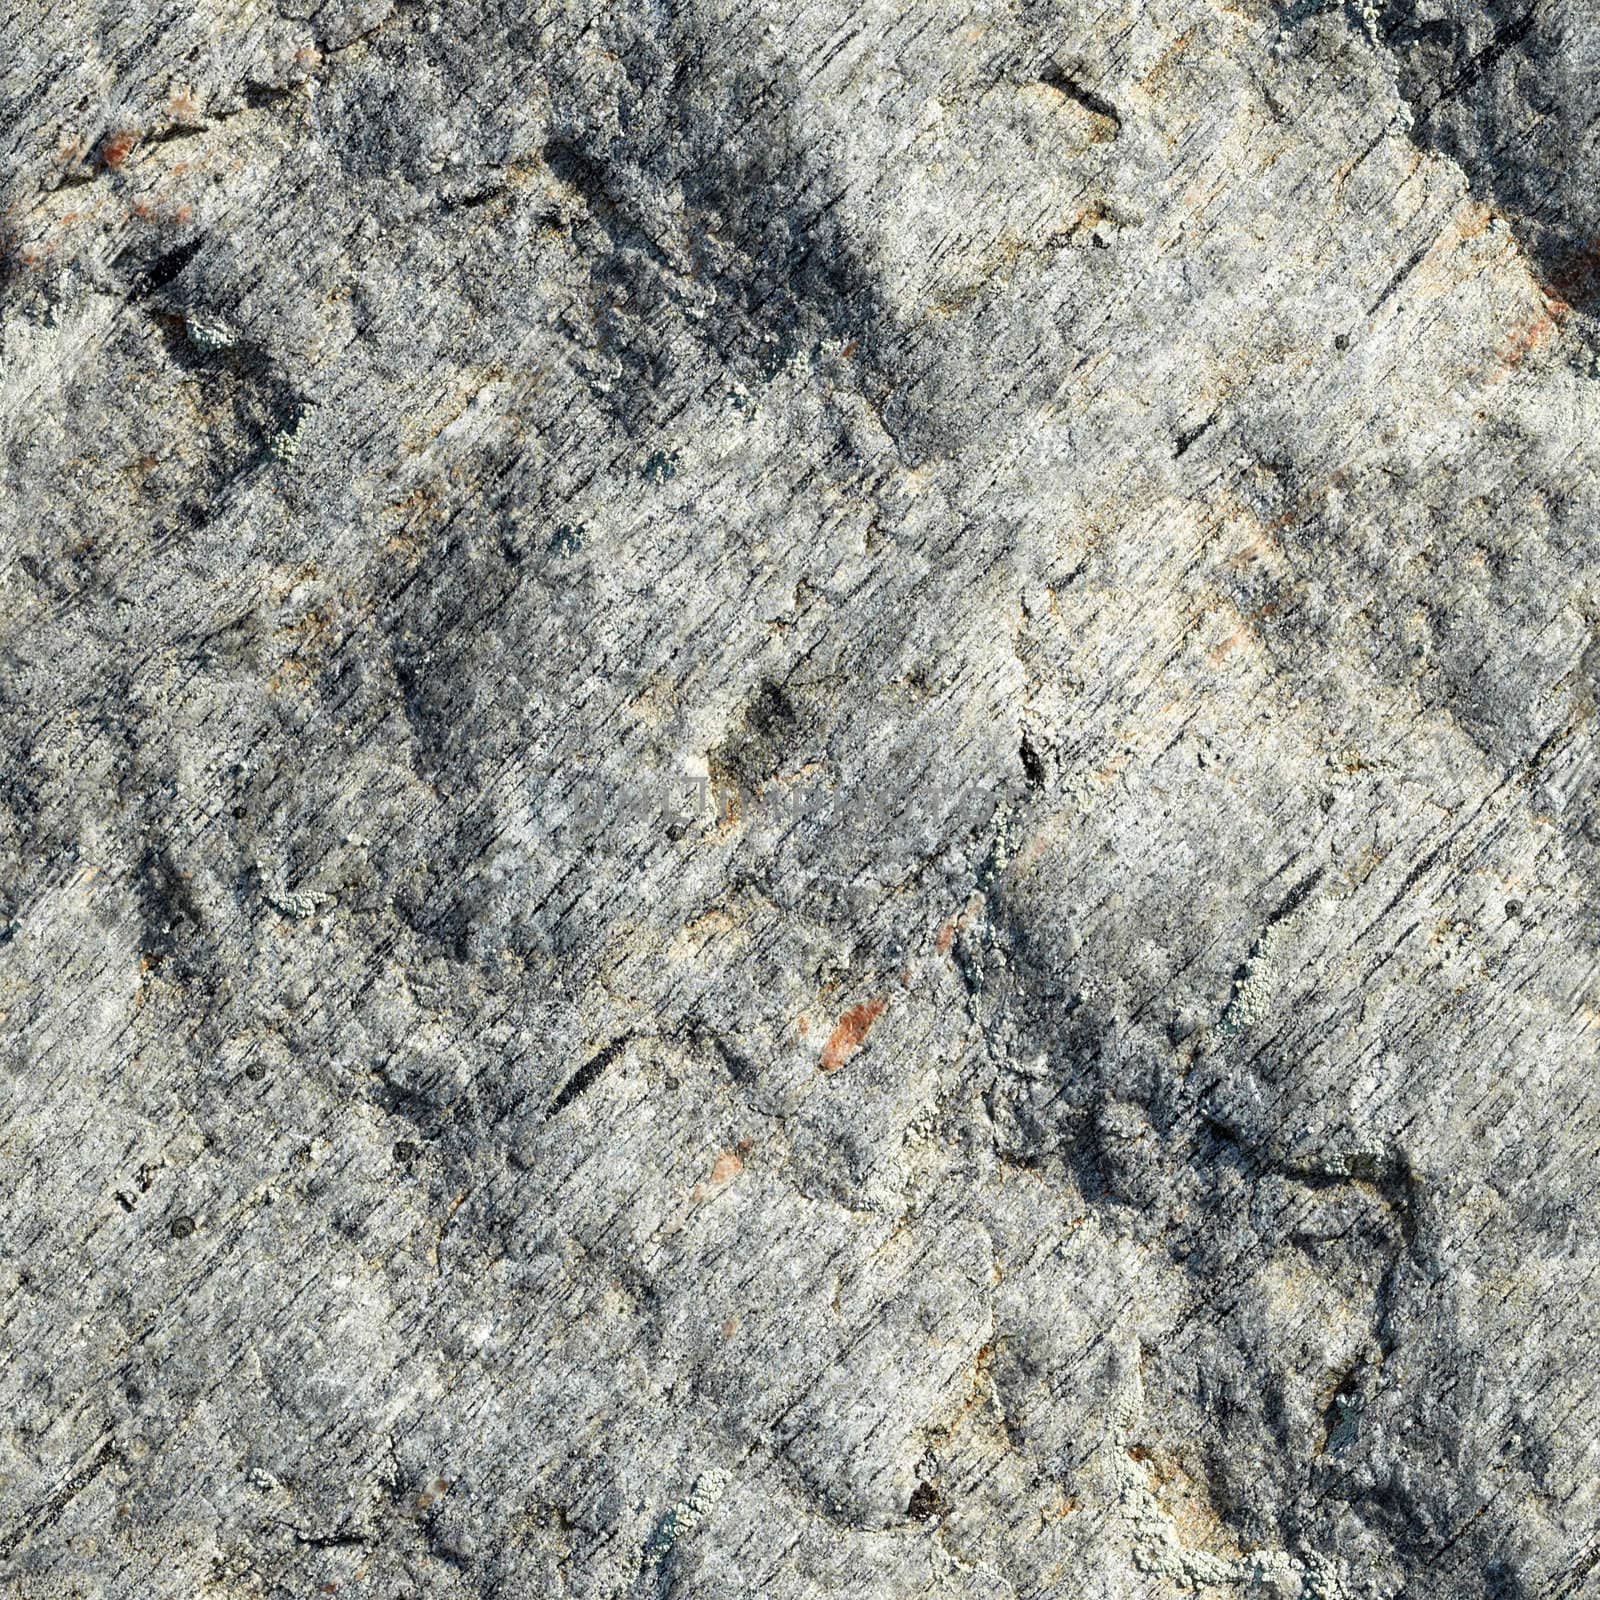 Surface of a raw rough stone - a seamless texture